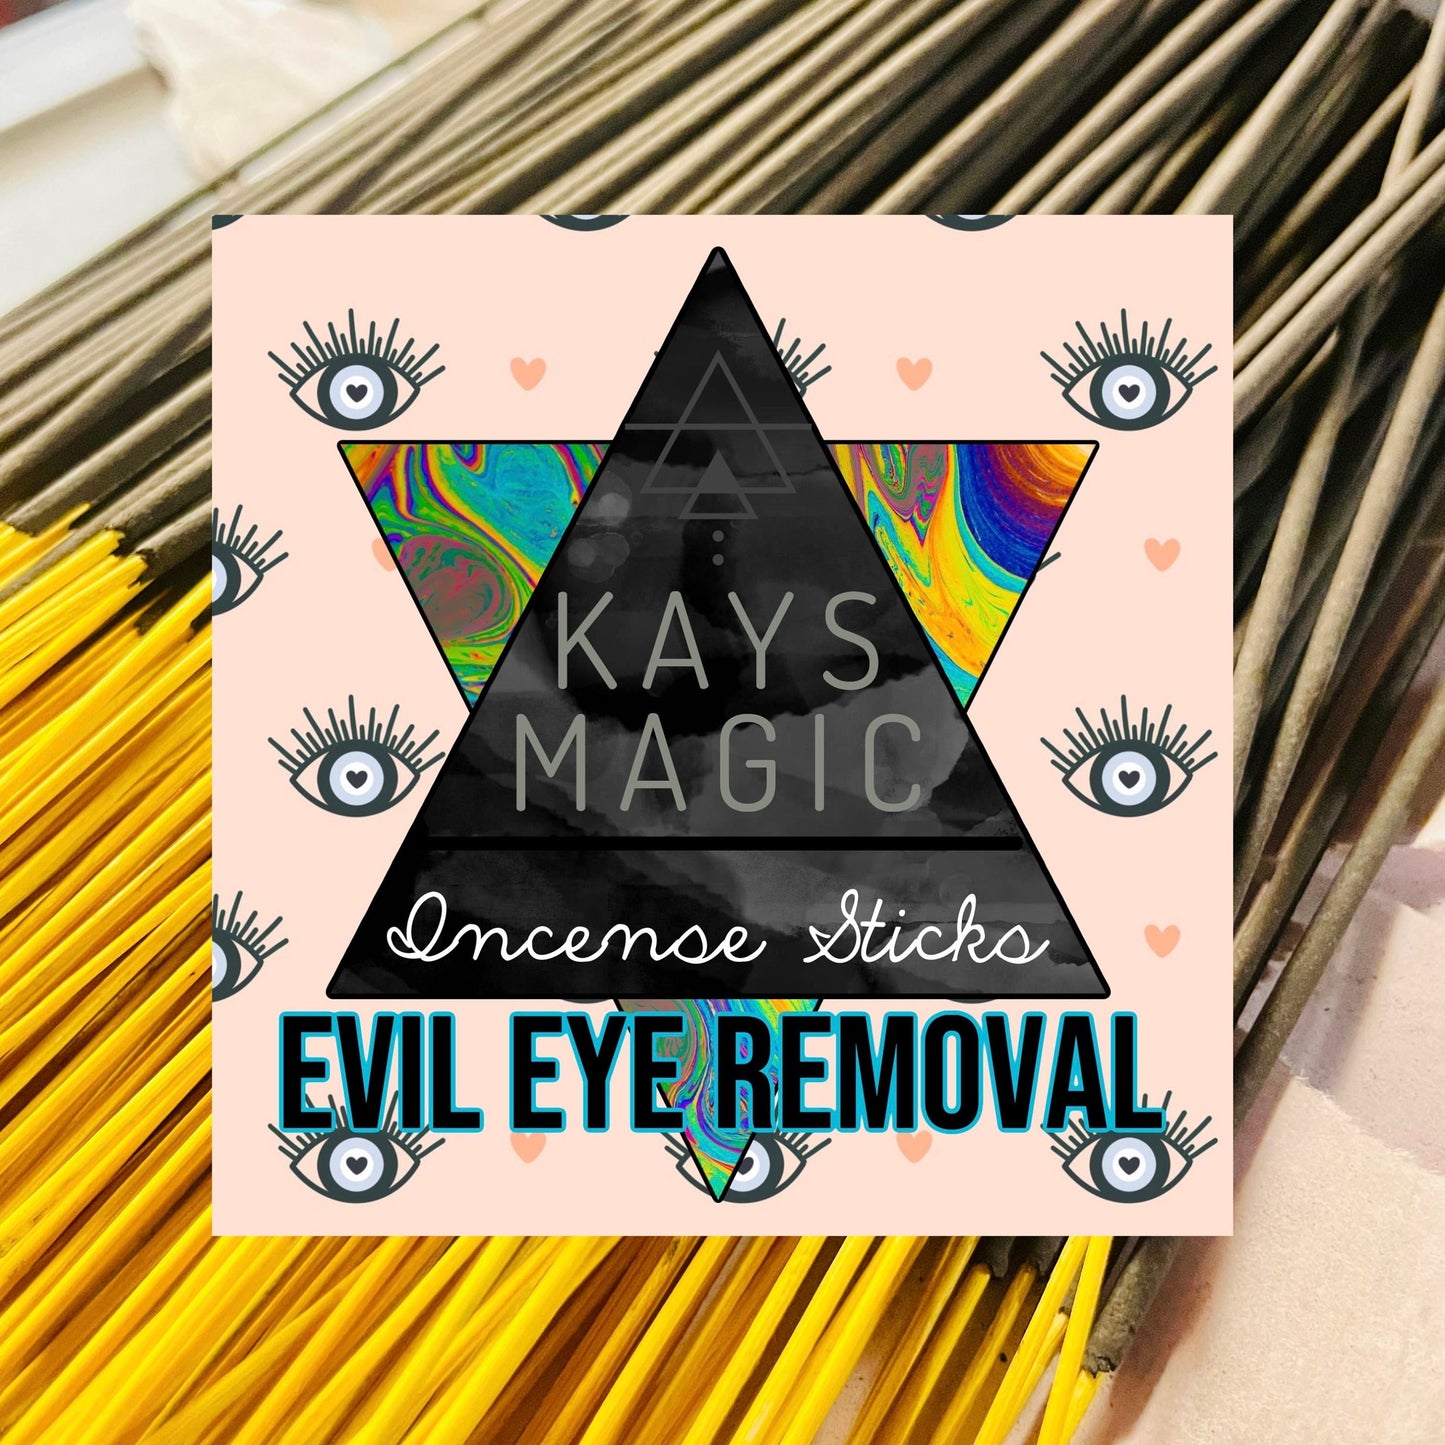 Evil Eye Removal Incense Sticks, 10 ct - Charcoal Incense Sticks - Hand-dipped